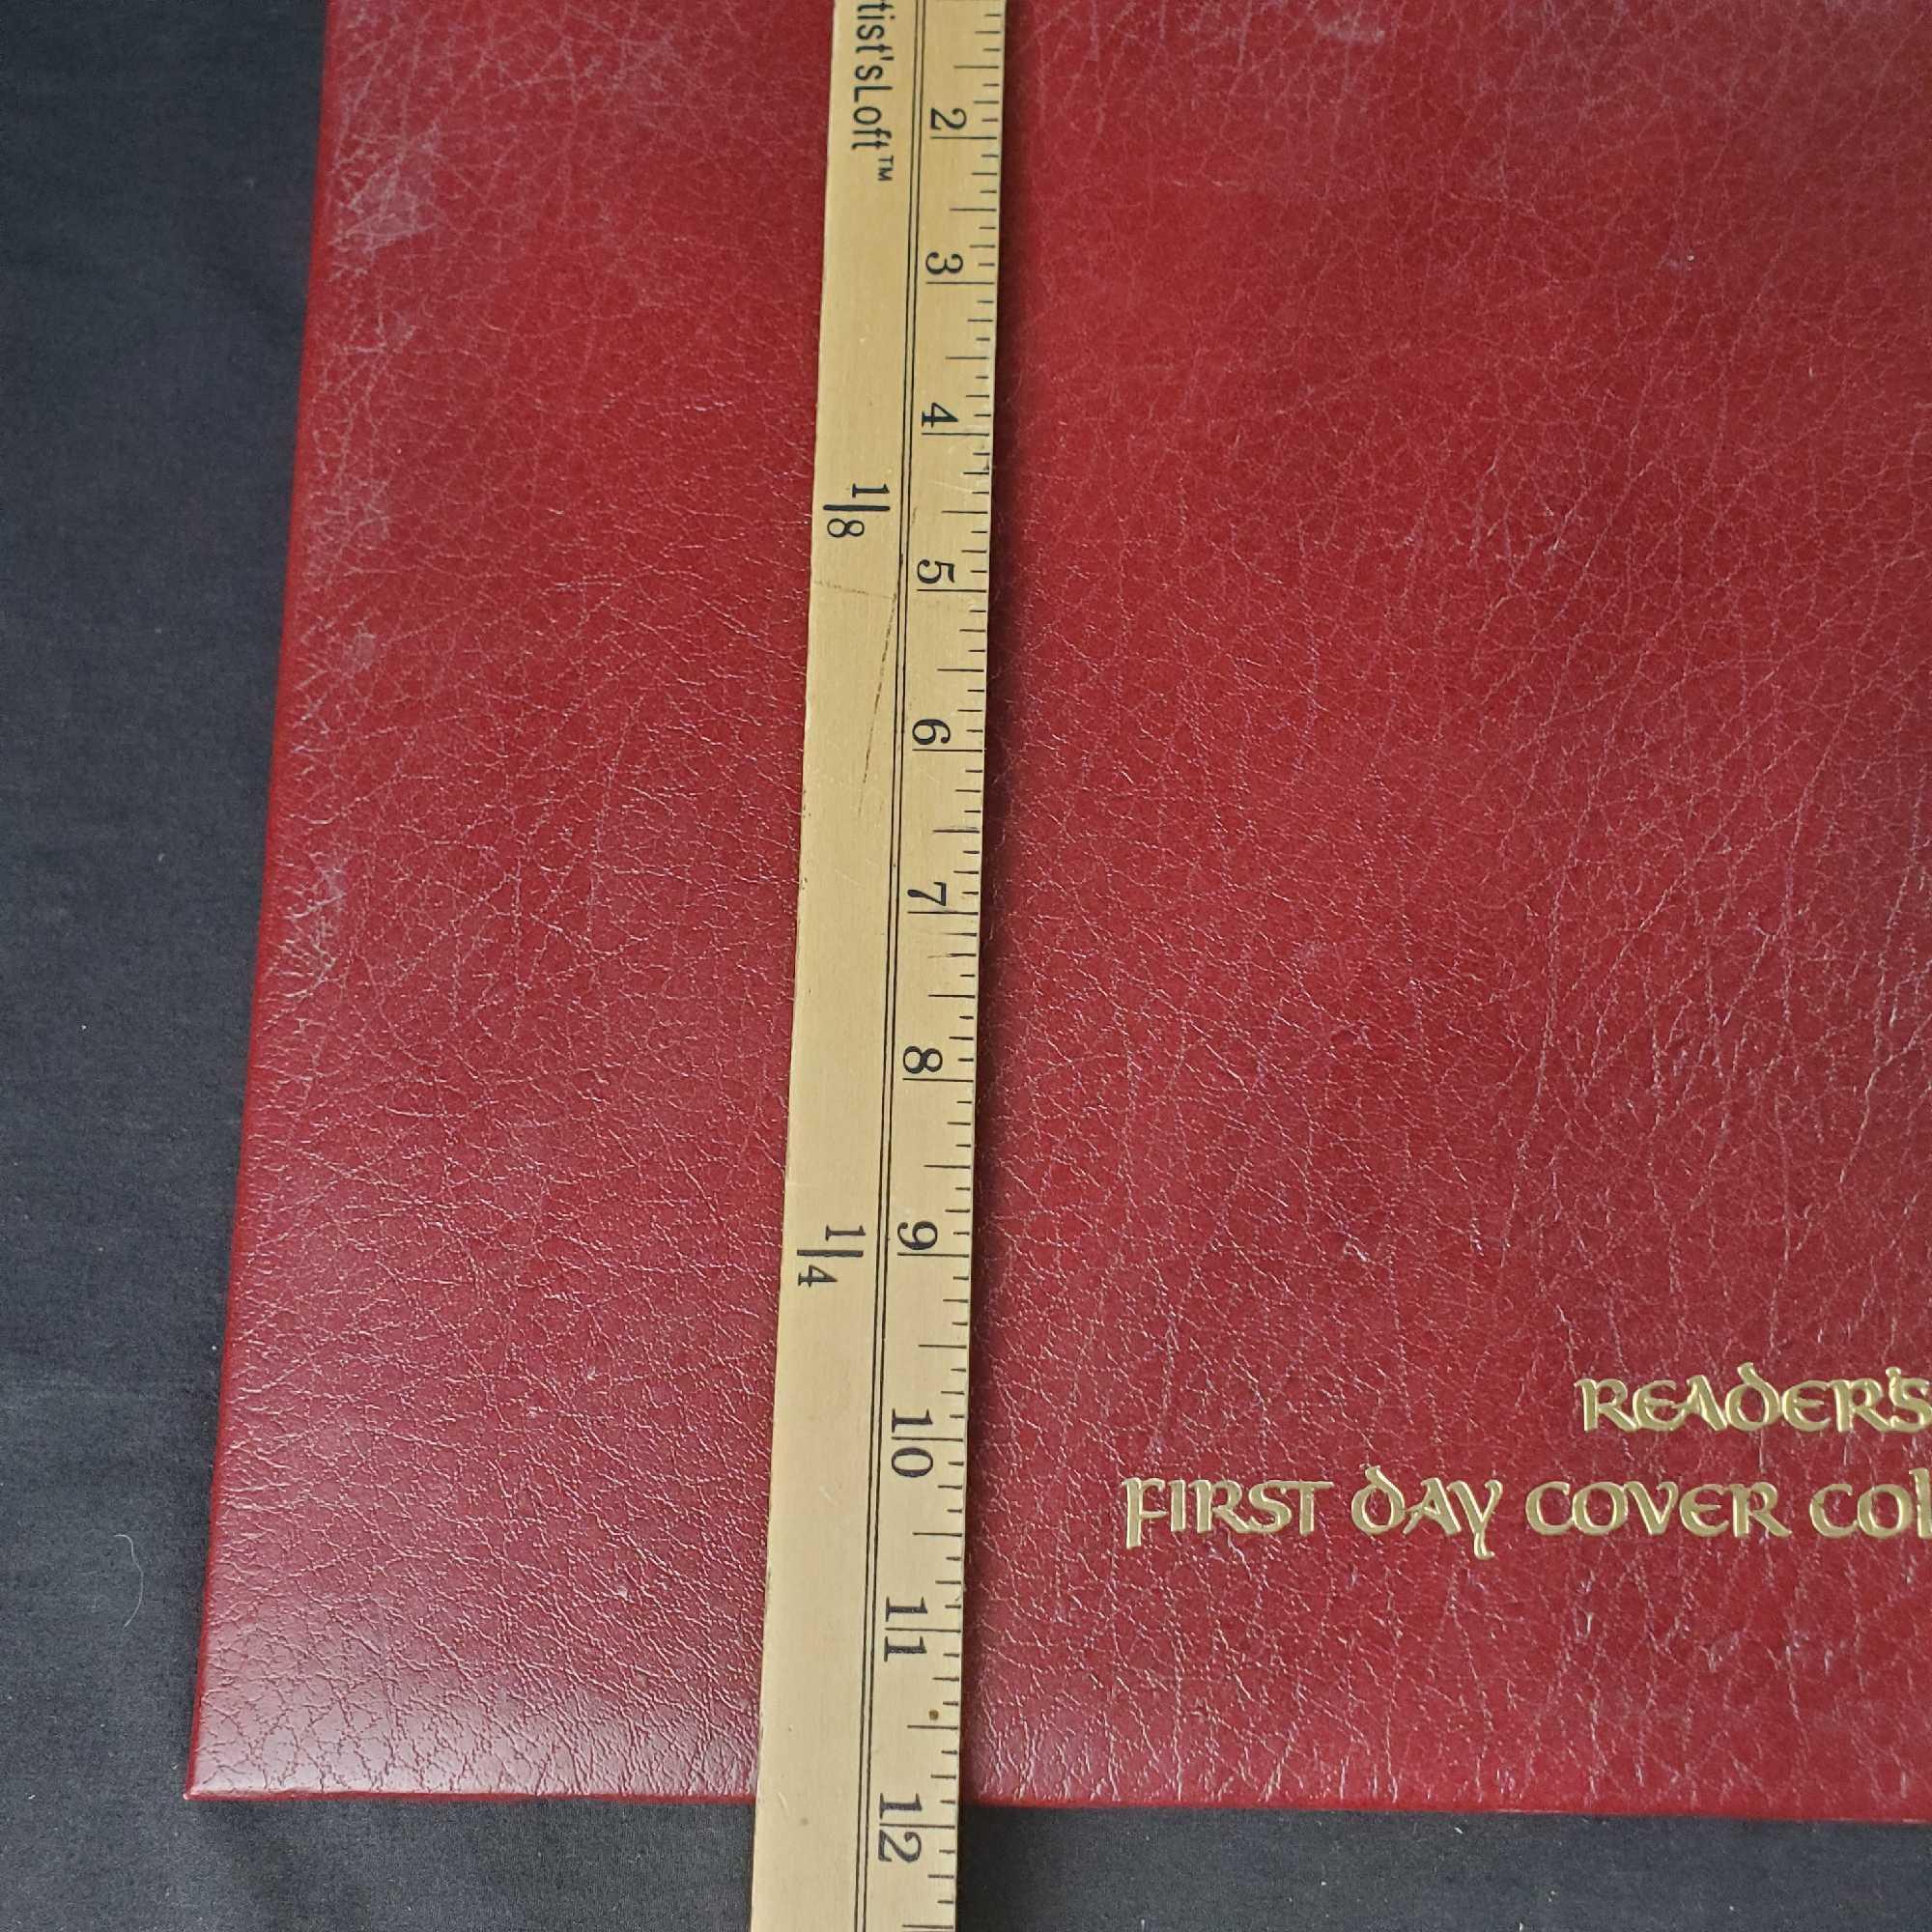 Vintage Scotts postage stamp catalog Readers Digest First Day Cover collection album